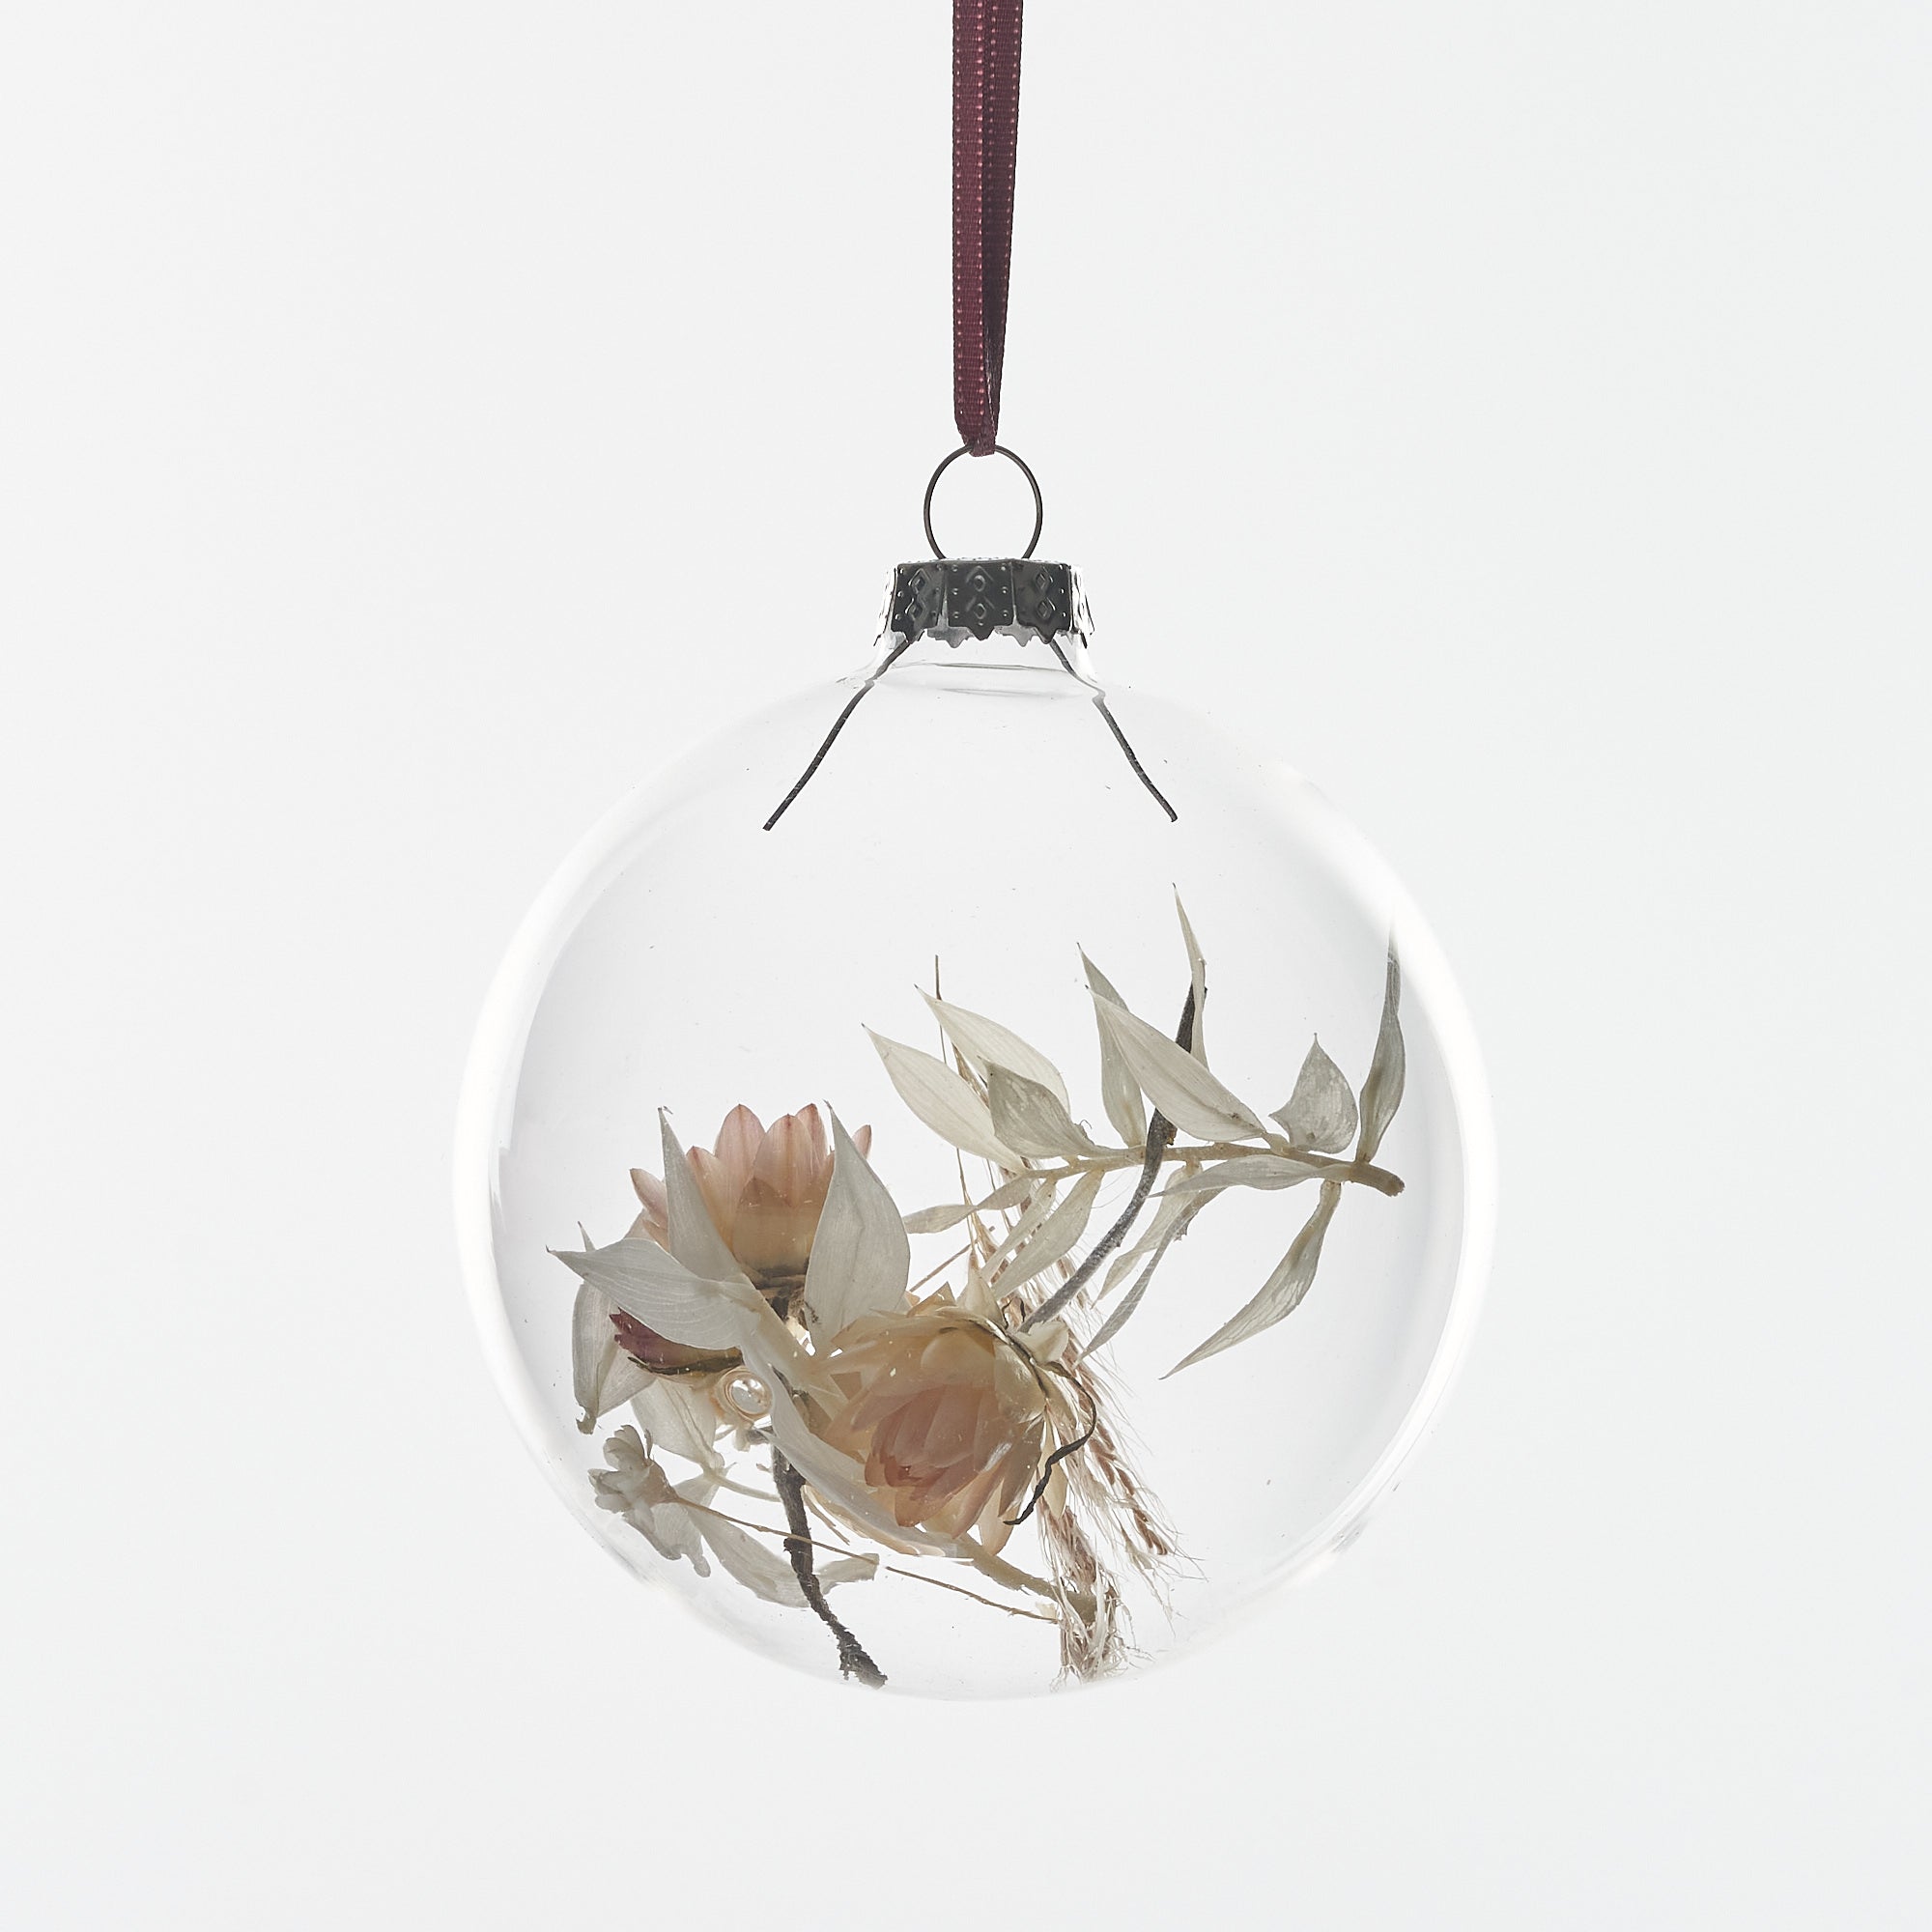 Set of 5 Dried flower Baubles: White